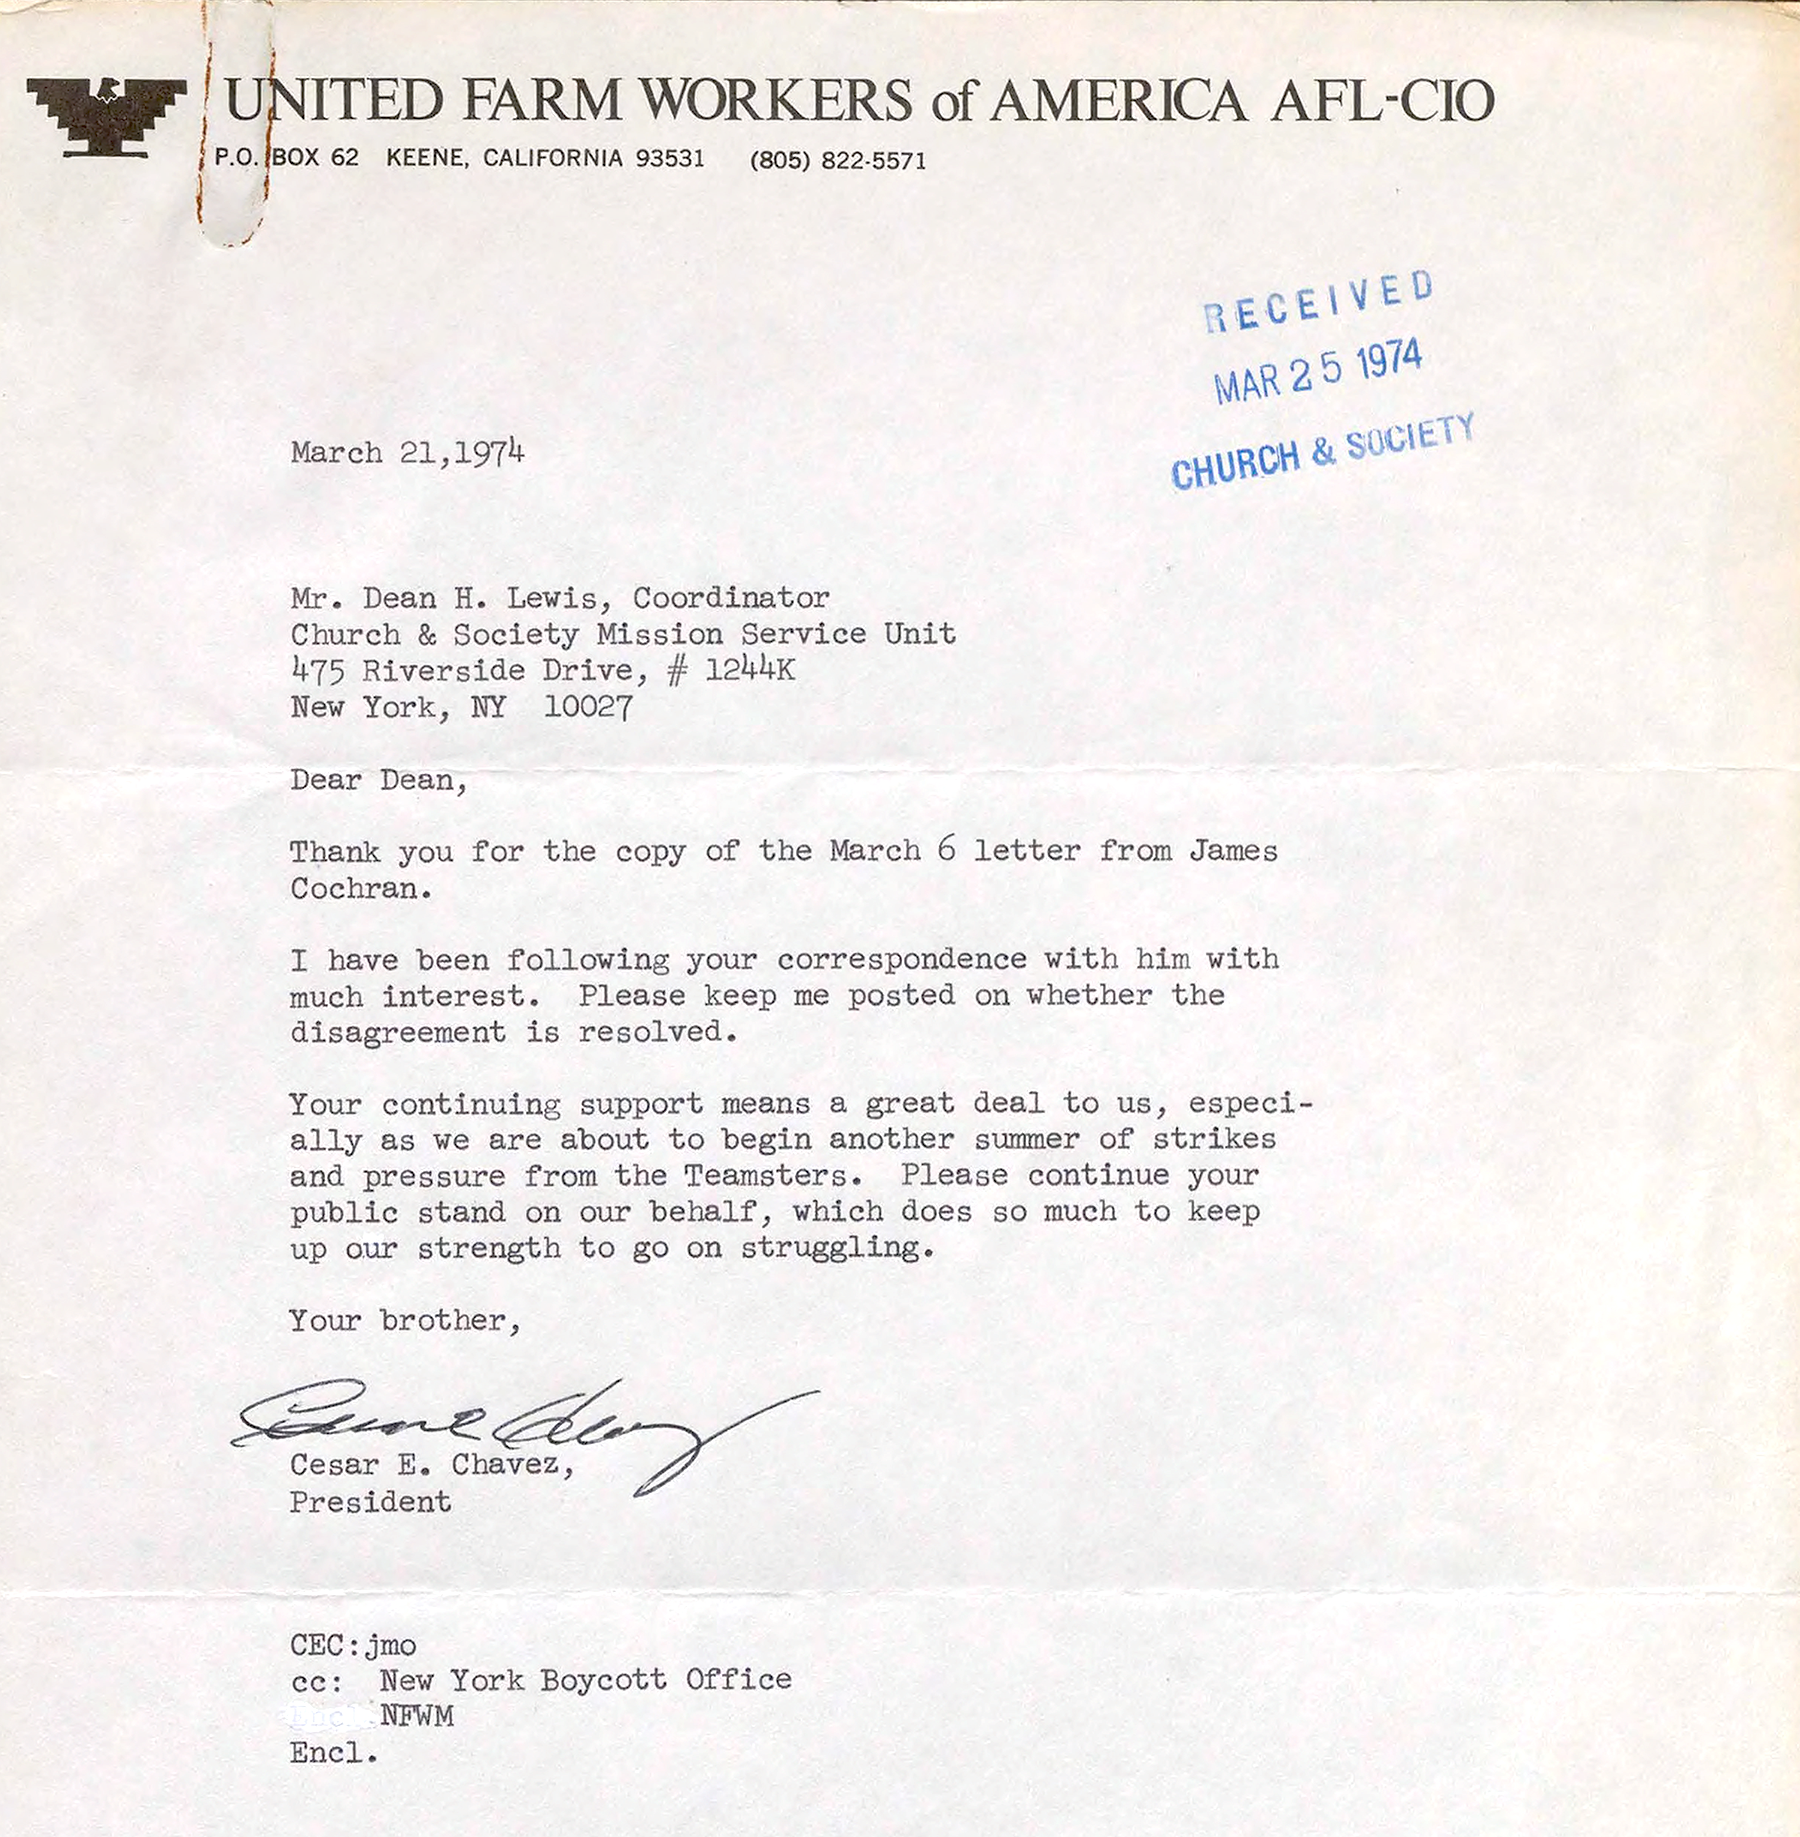 March 21, 1974 letter from labor activist Cesar Chavez to the Church & Society Mission Service Unit. Pearl ID: 344293.